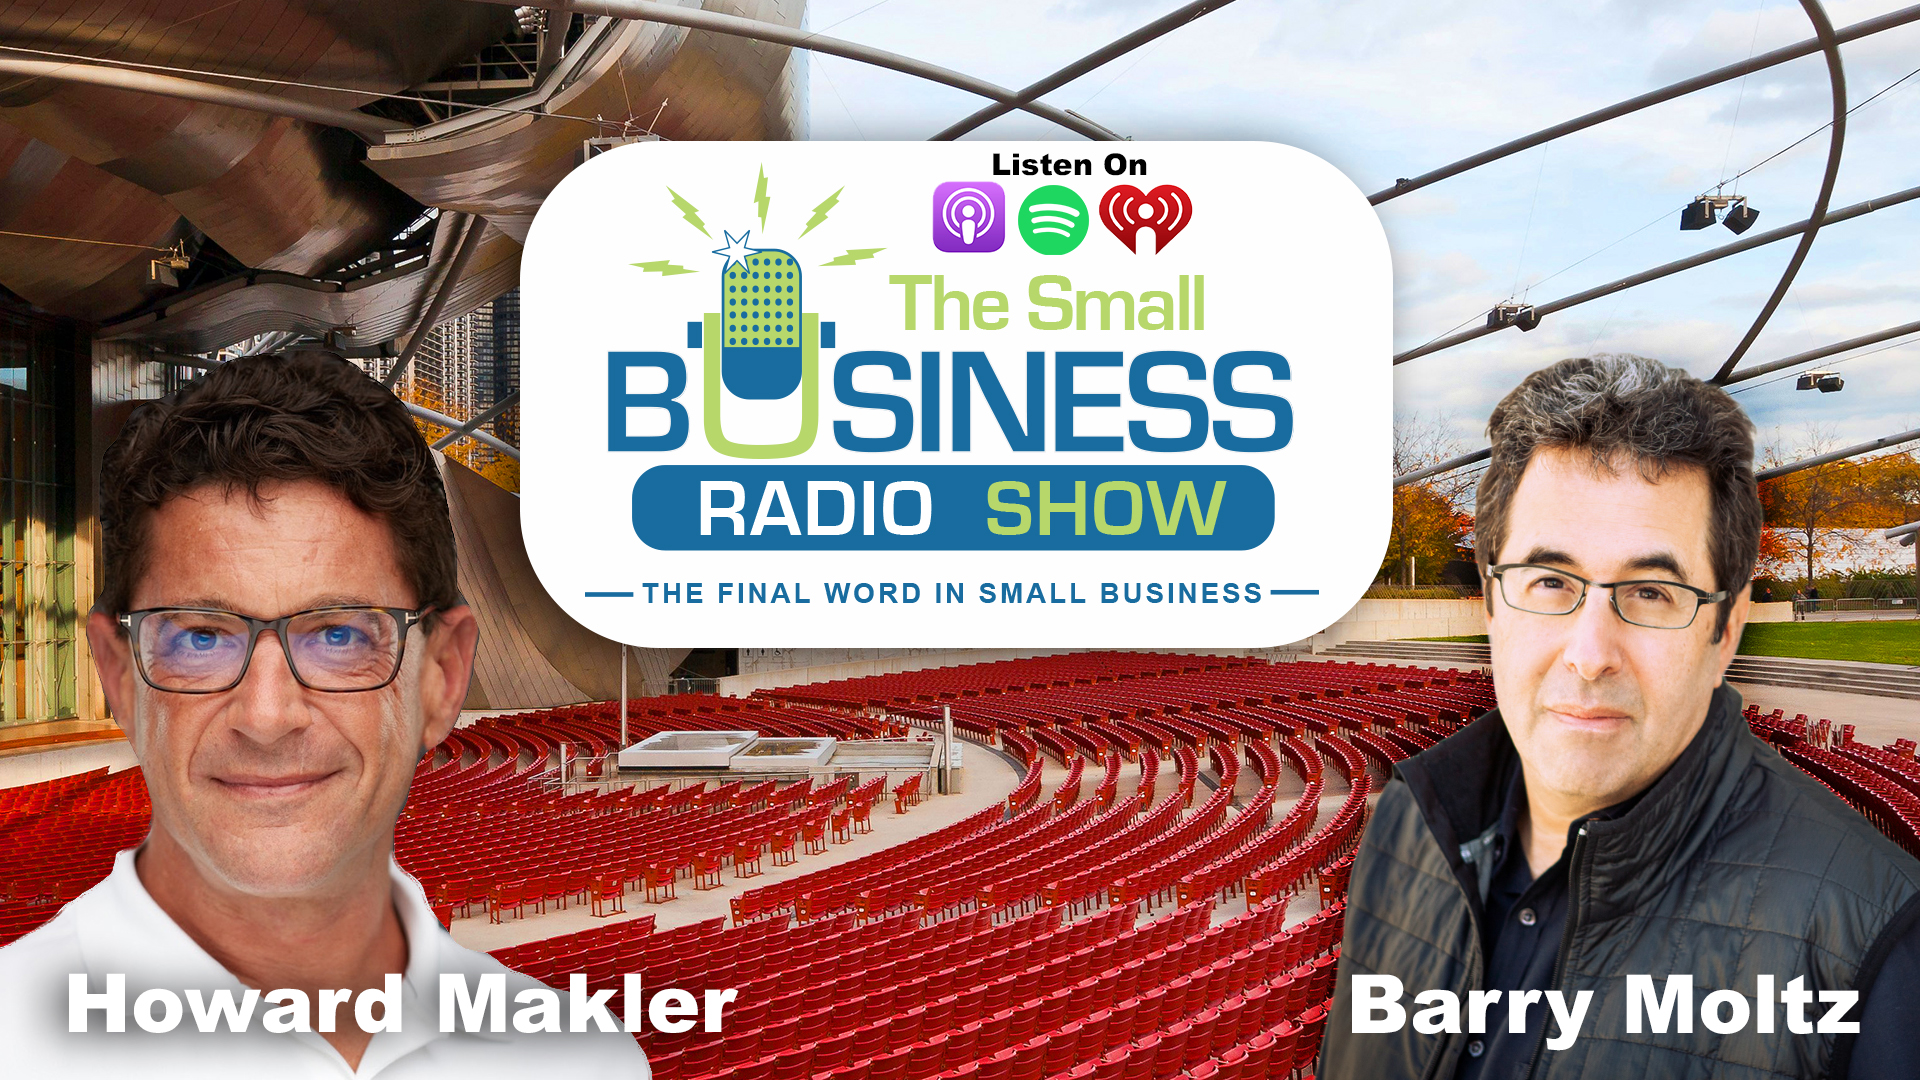 Howard Makler on The Small Business Radio Show